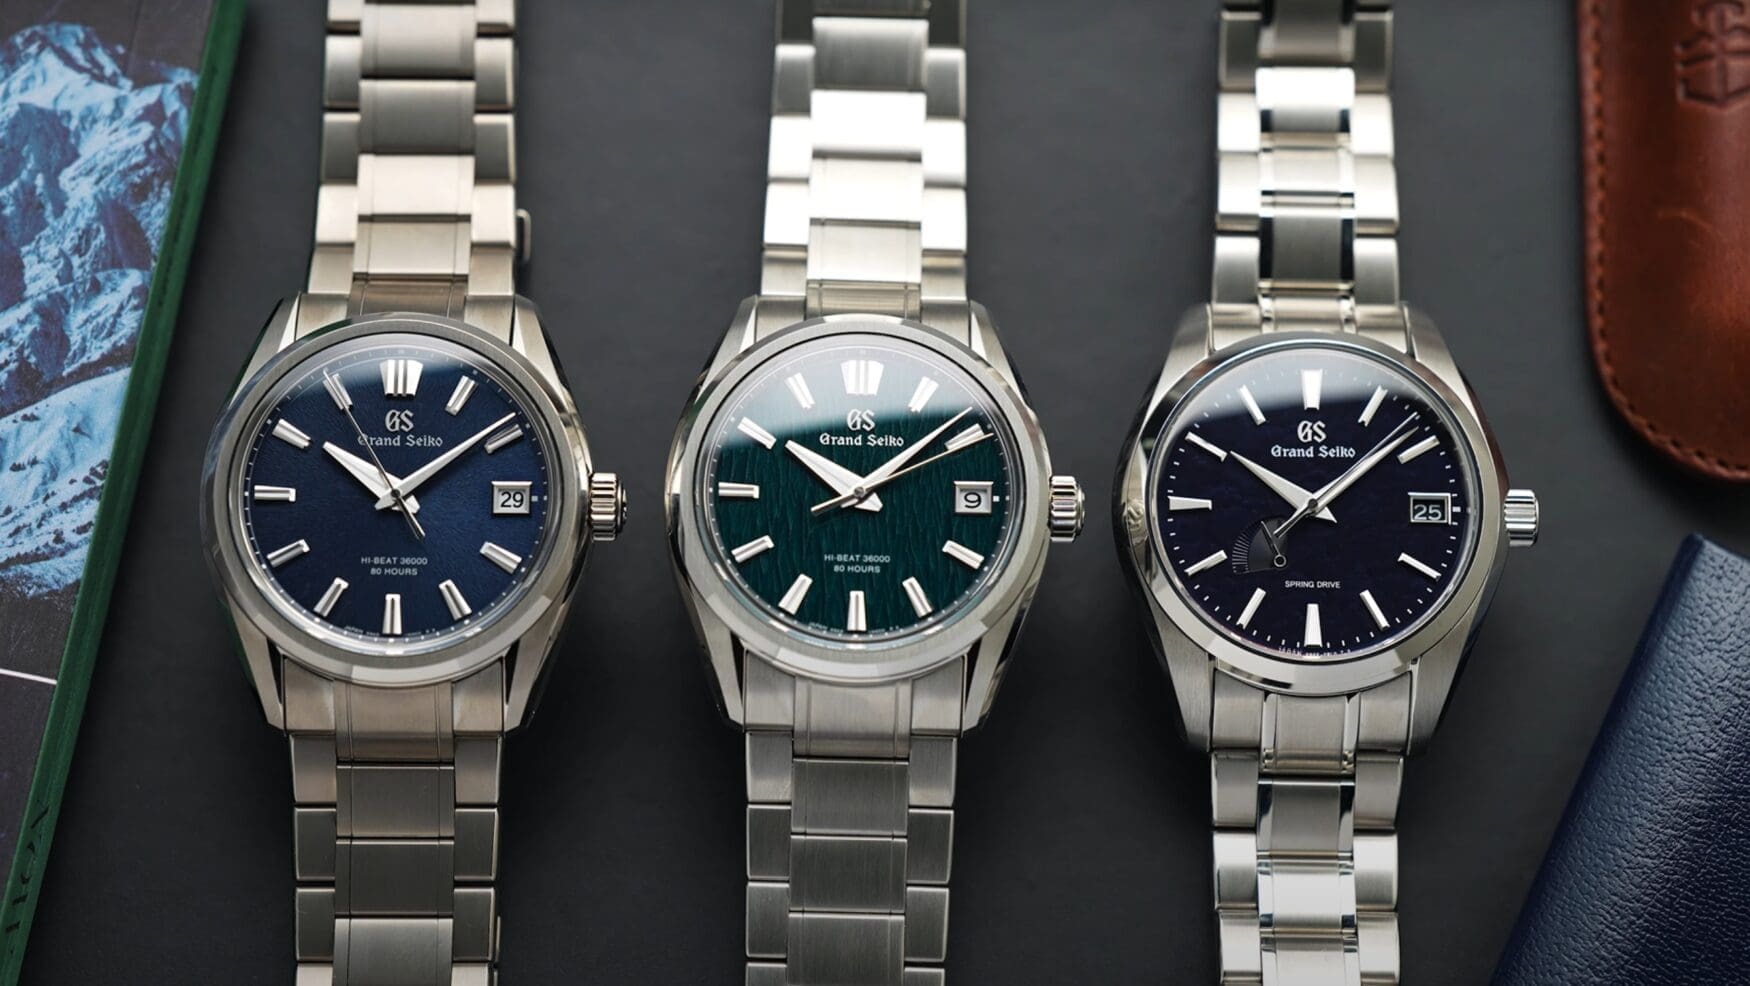 Grand Seiko’s latest trio of online exclusives are worth skipping the boutique experience for